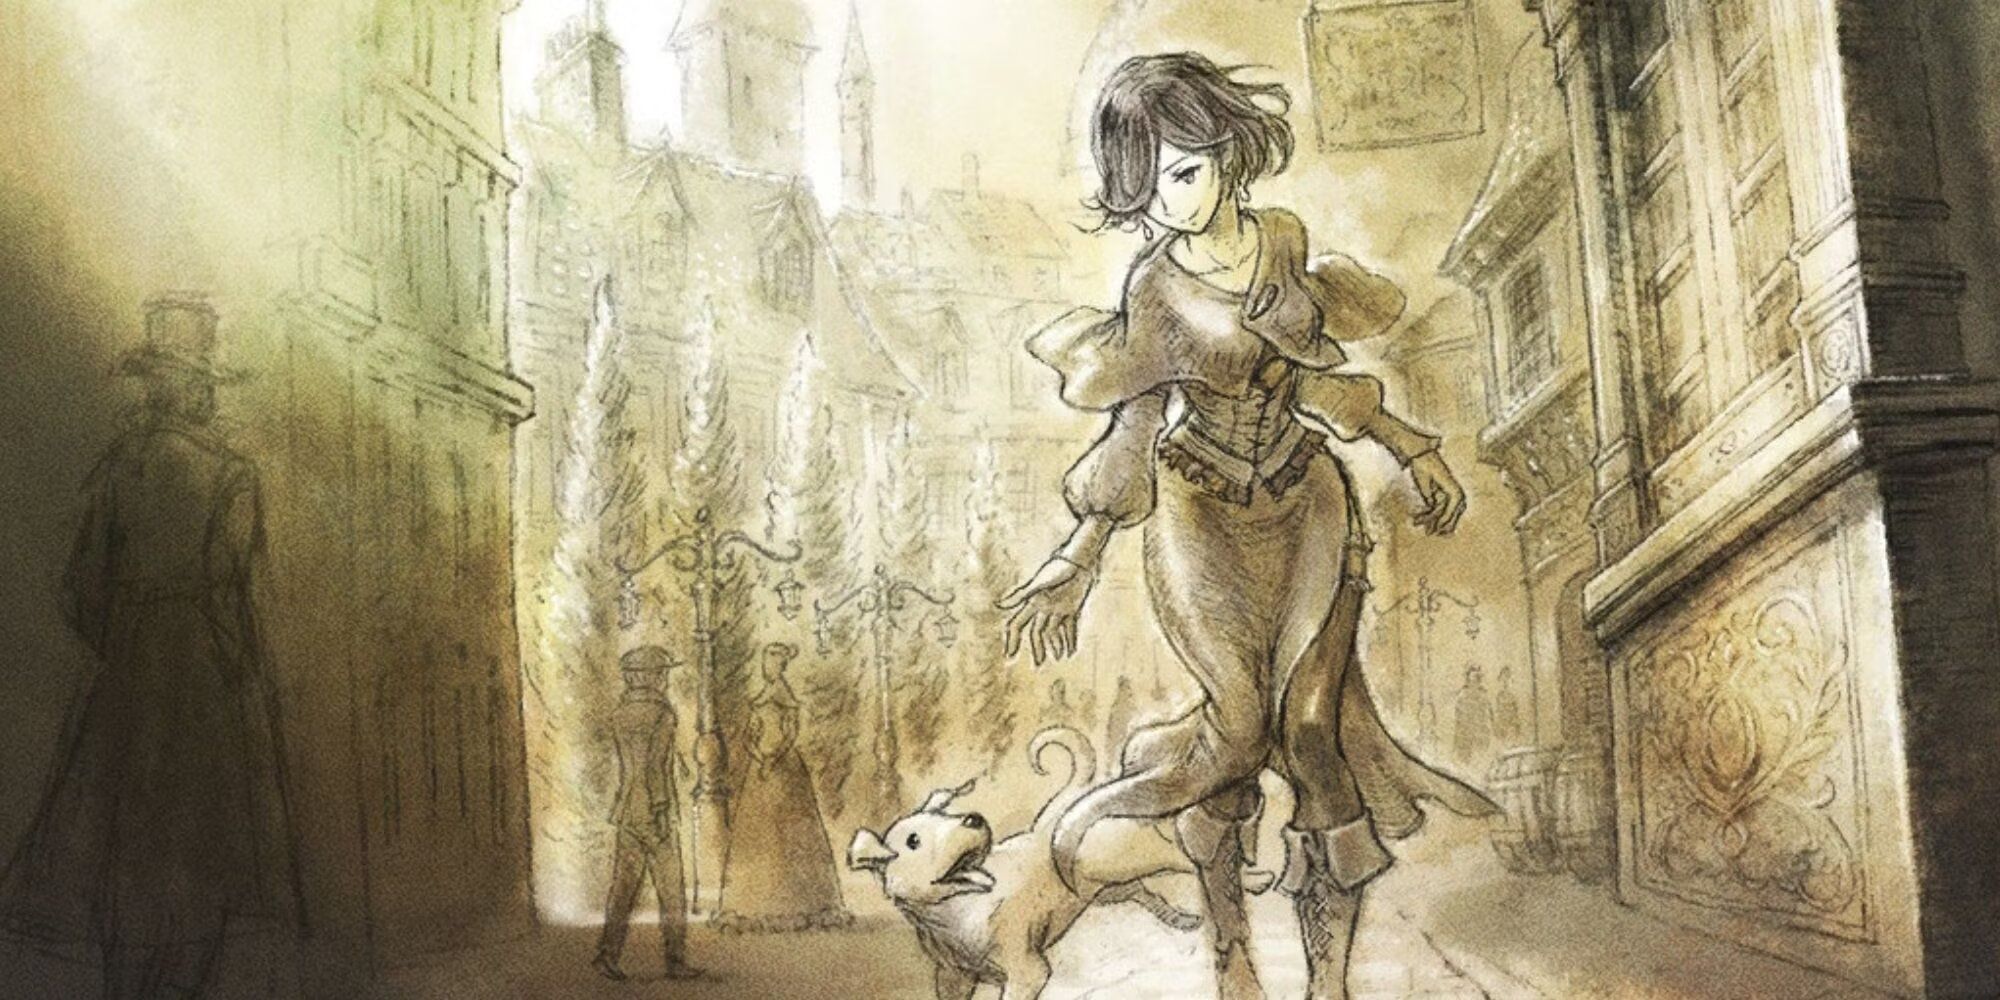 How to get Cursed Armor in Octopath Traveler 2